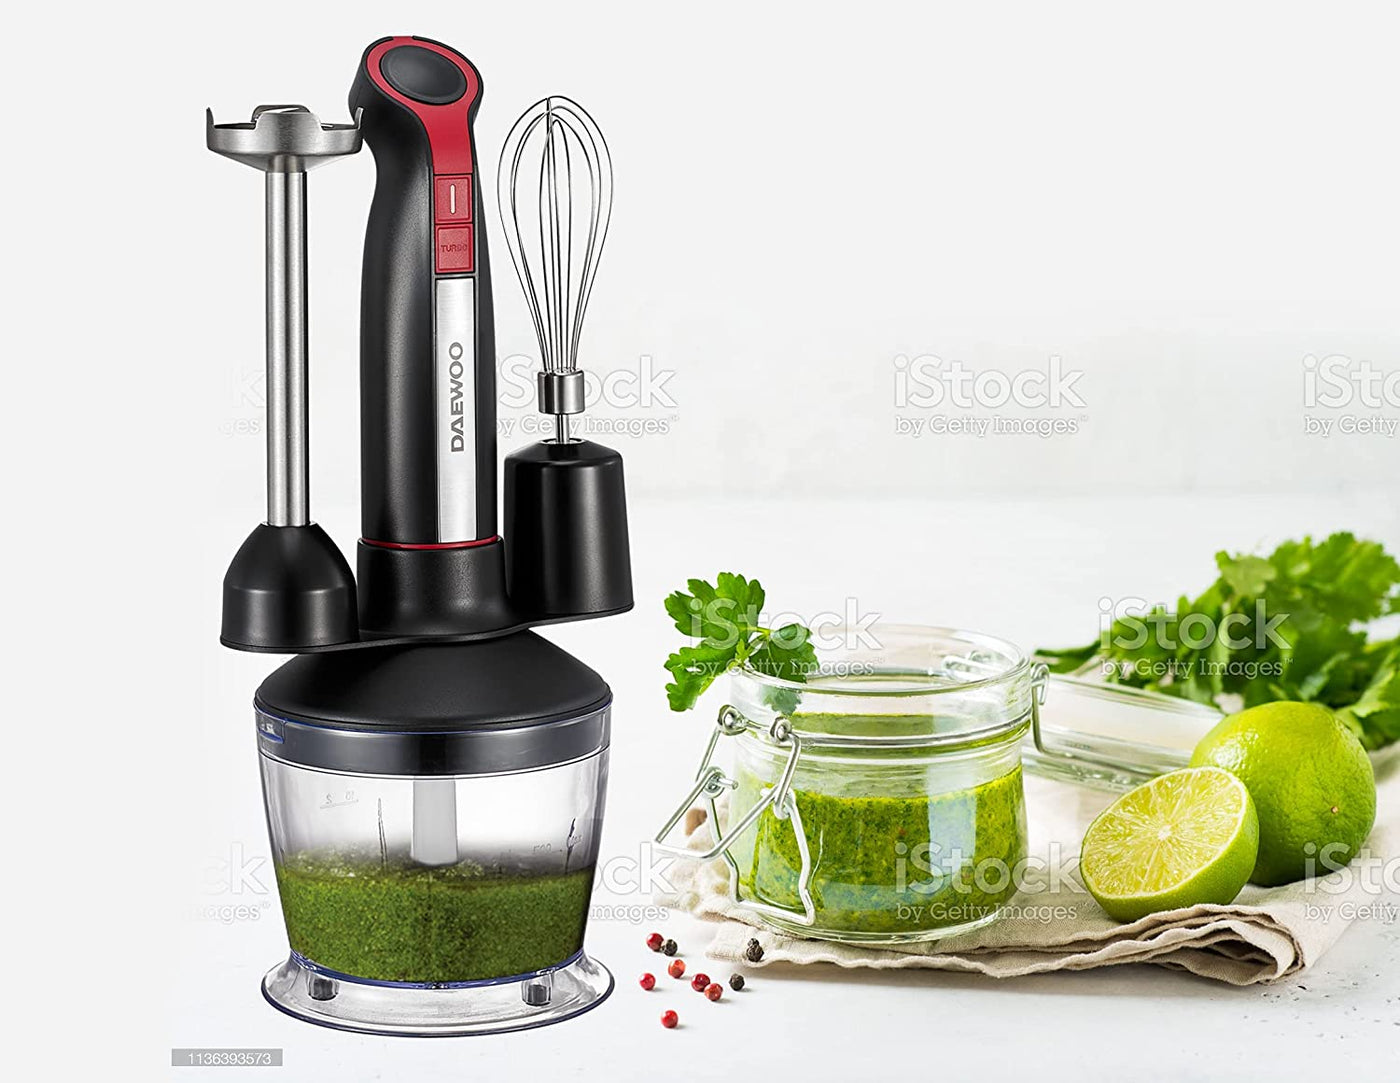 400W 4-in-1 Stainless Steel Hand Blender with Chopper and Whisk